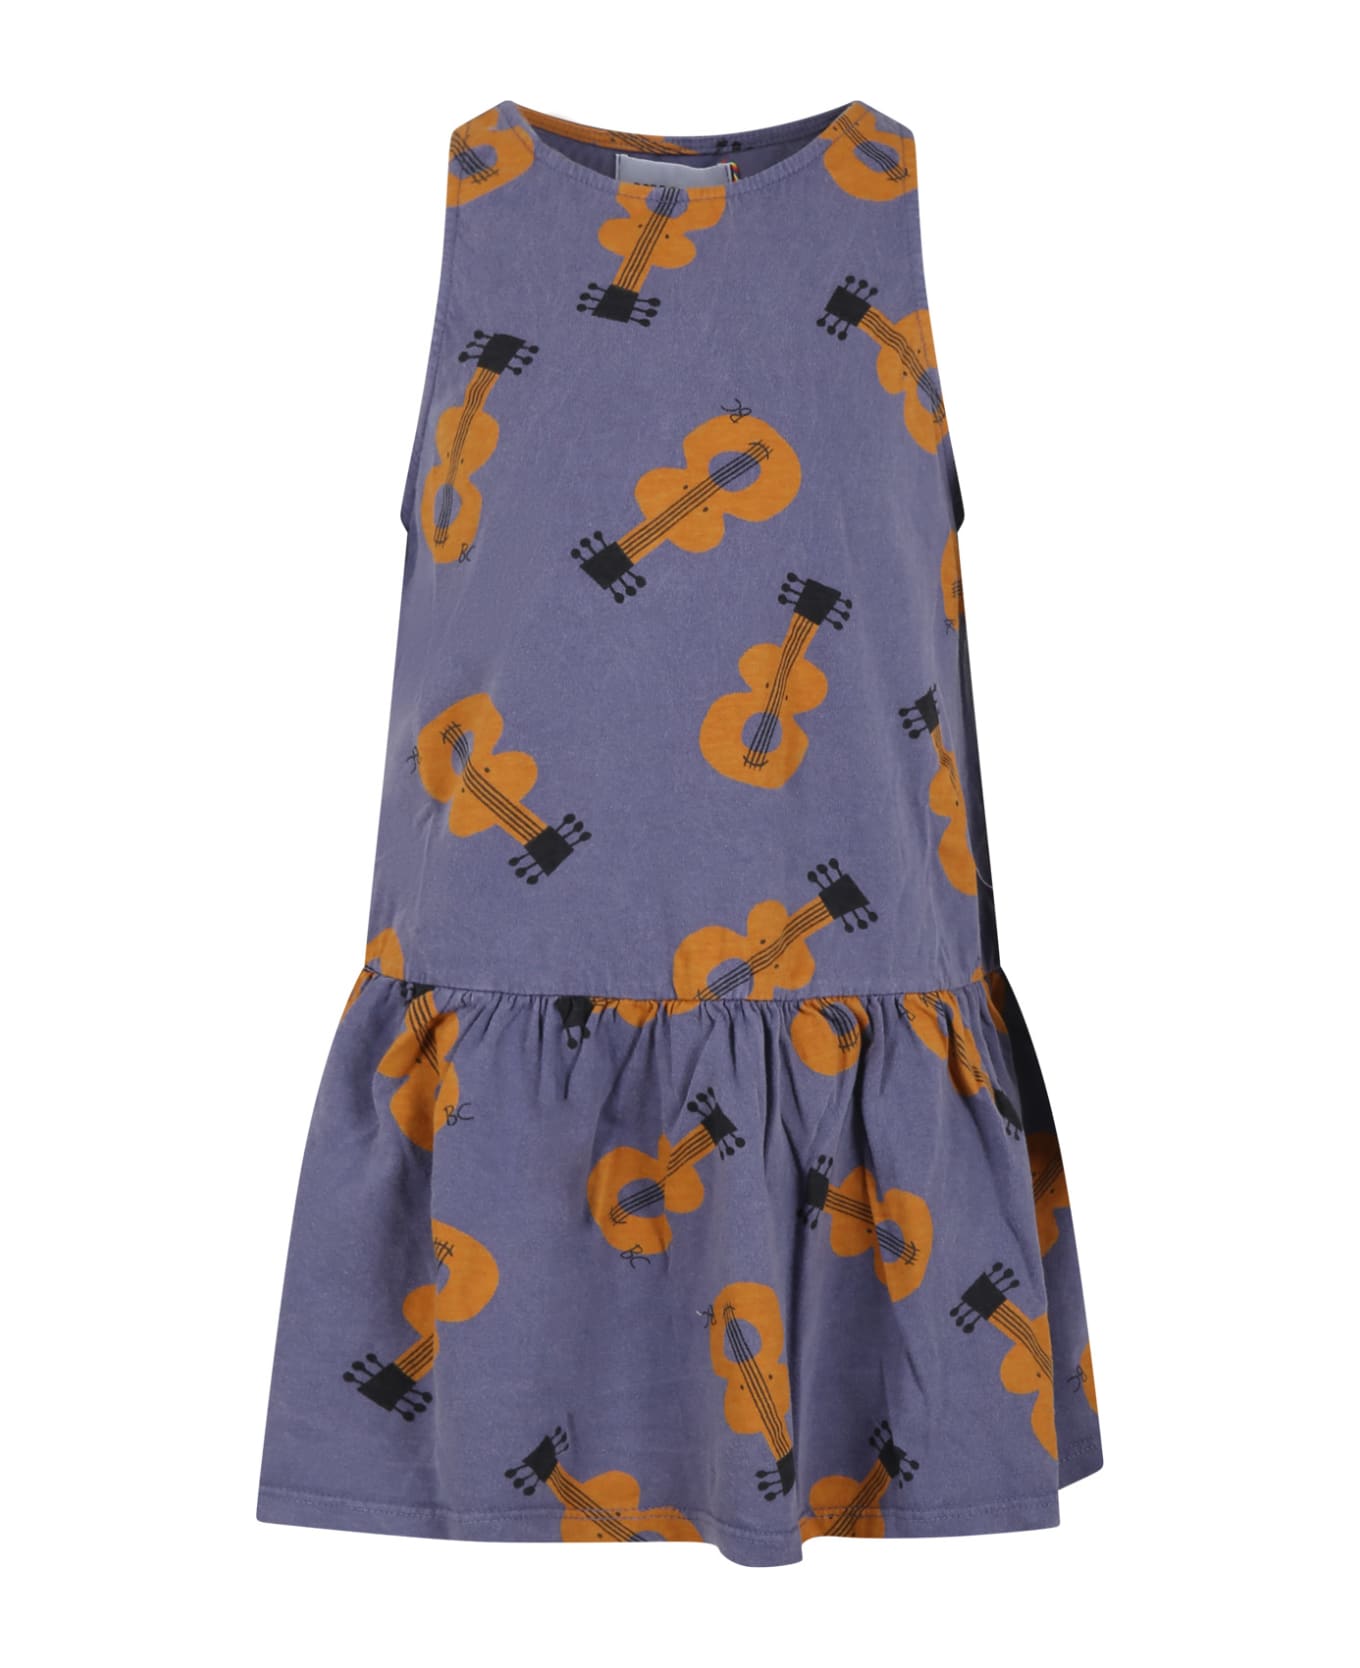 Bobo Choses Purple Dress For Girl With Guitars - Violet